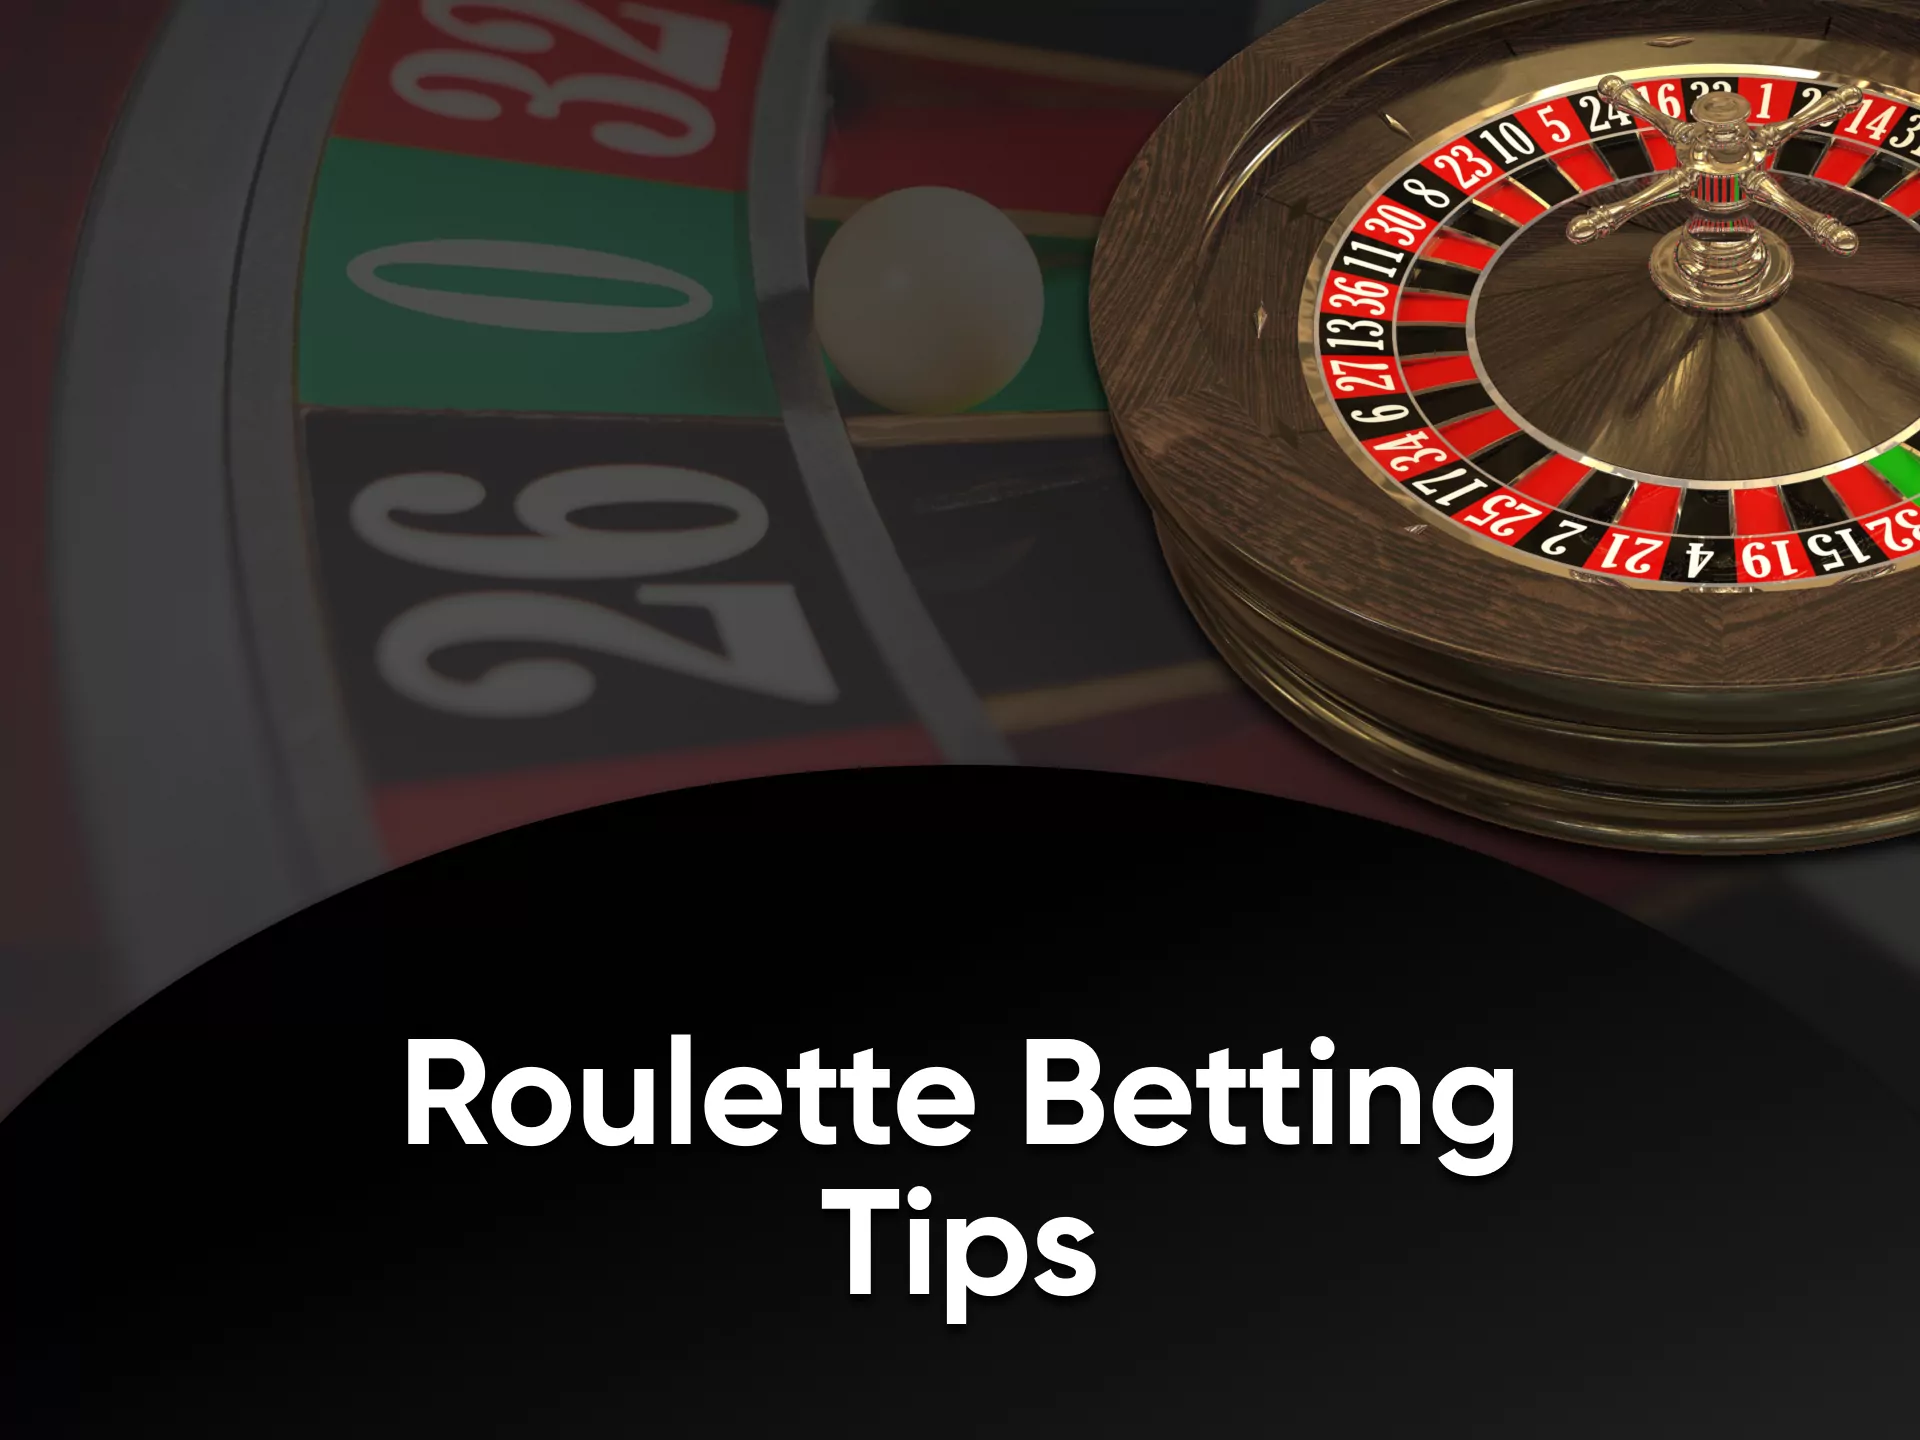 Gain the knowledge to win at online roulette.